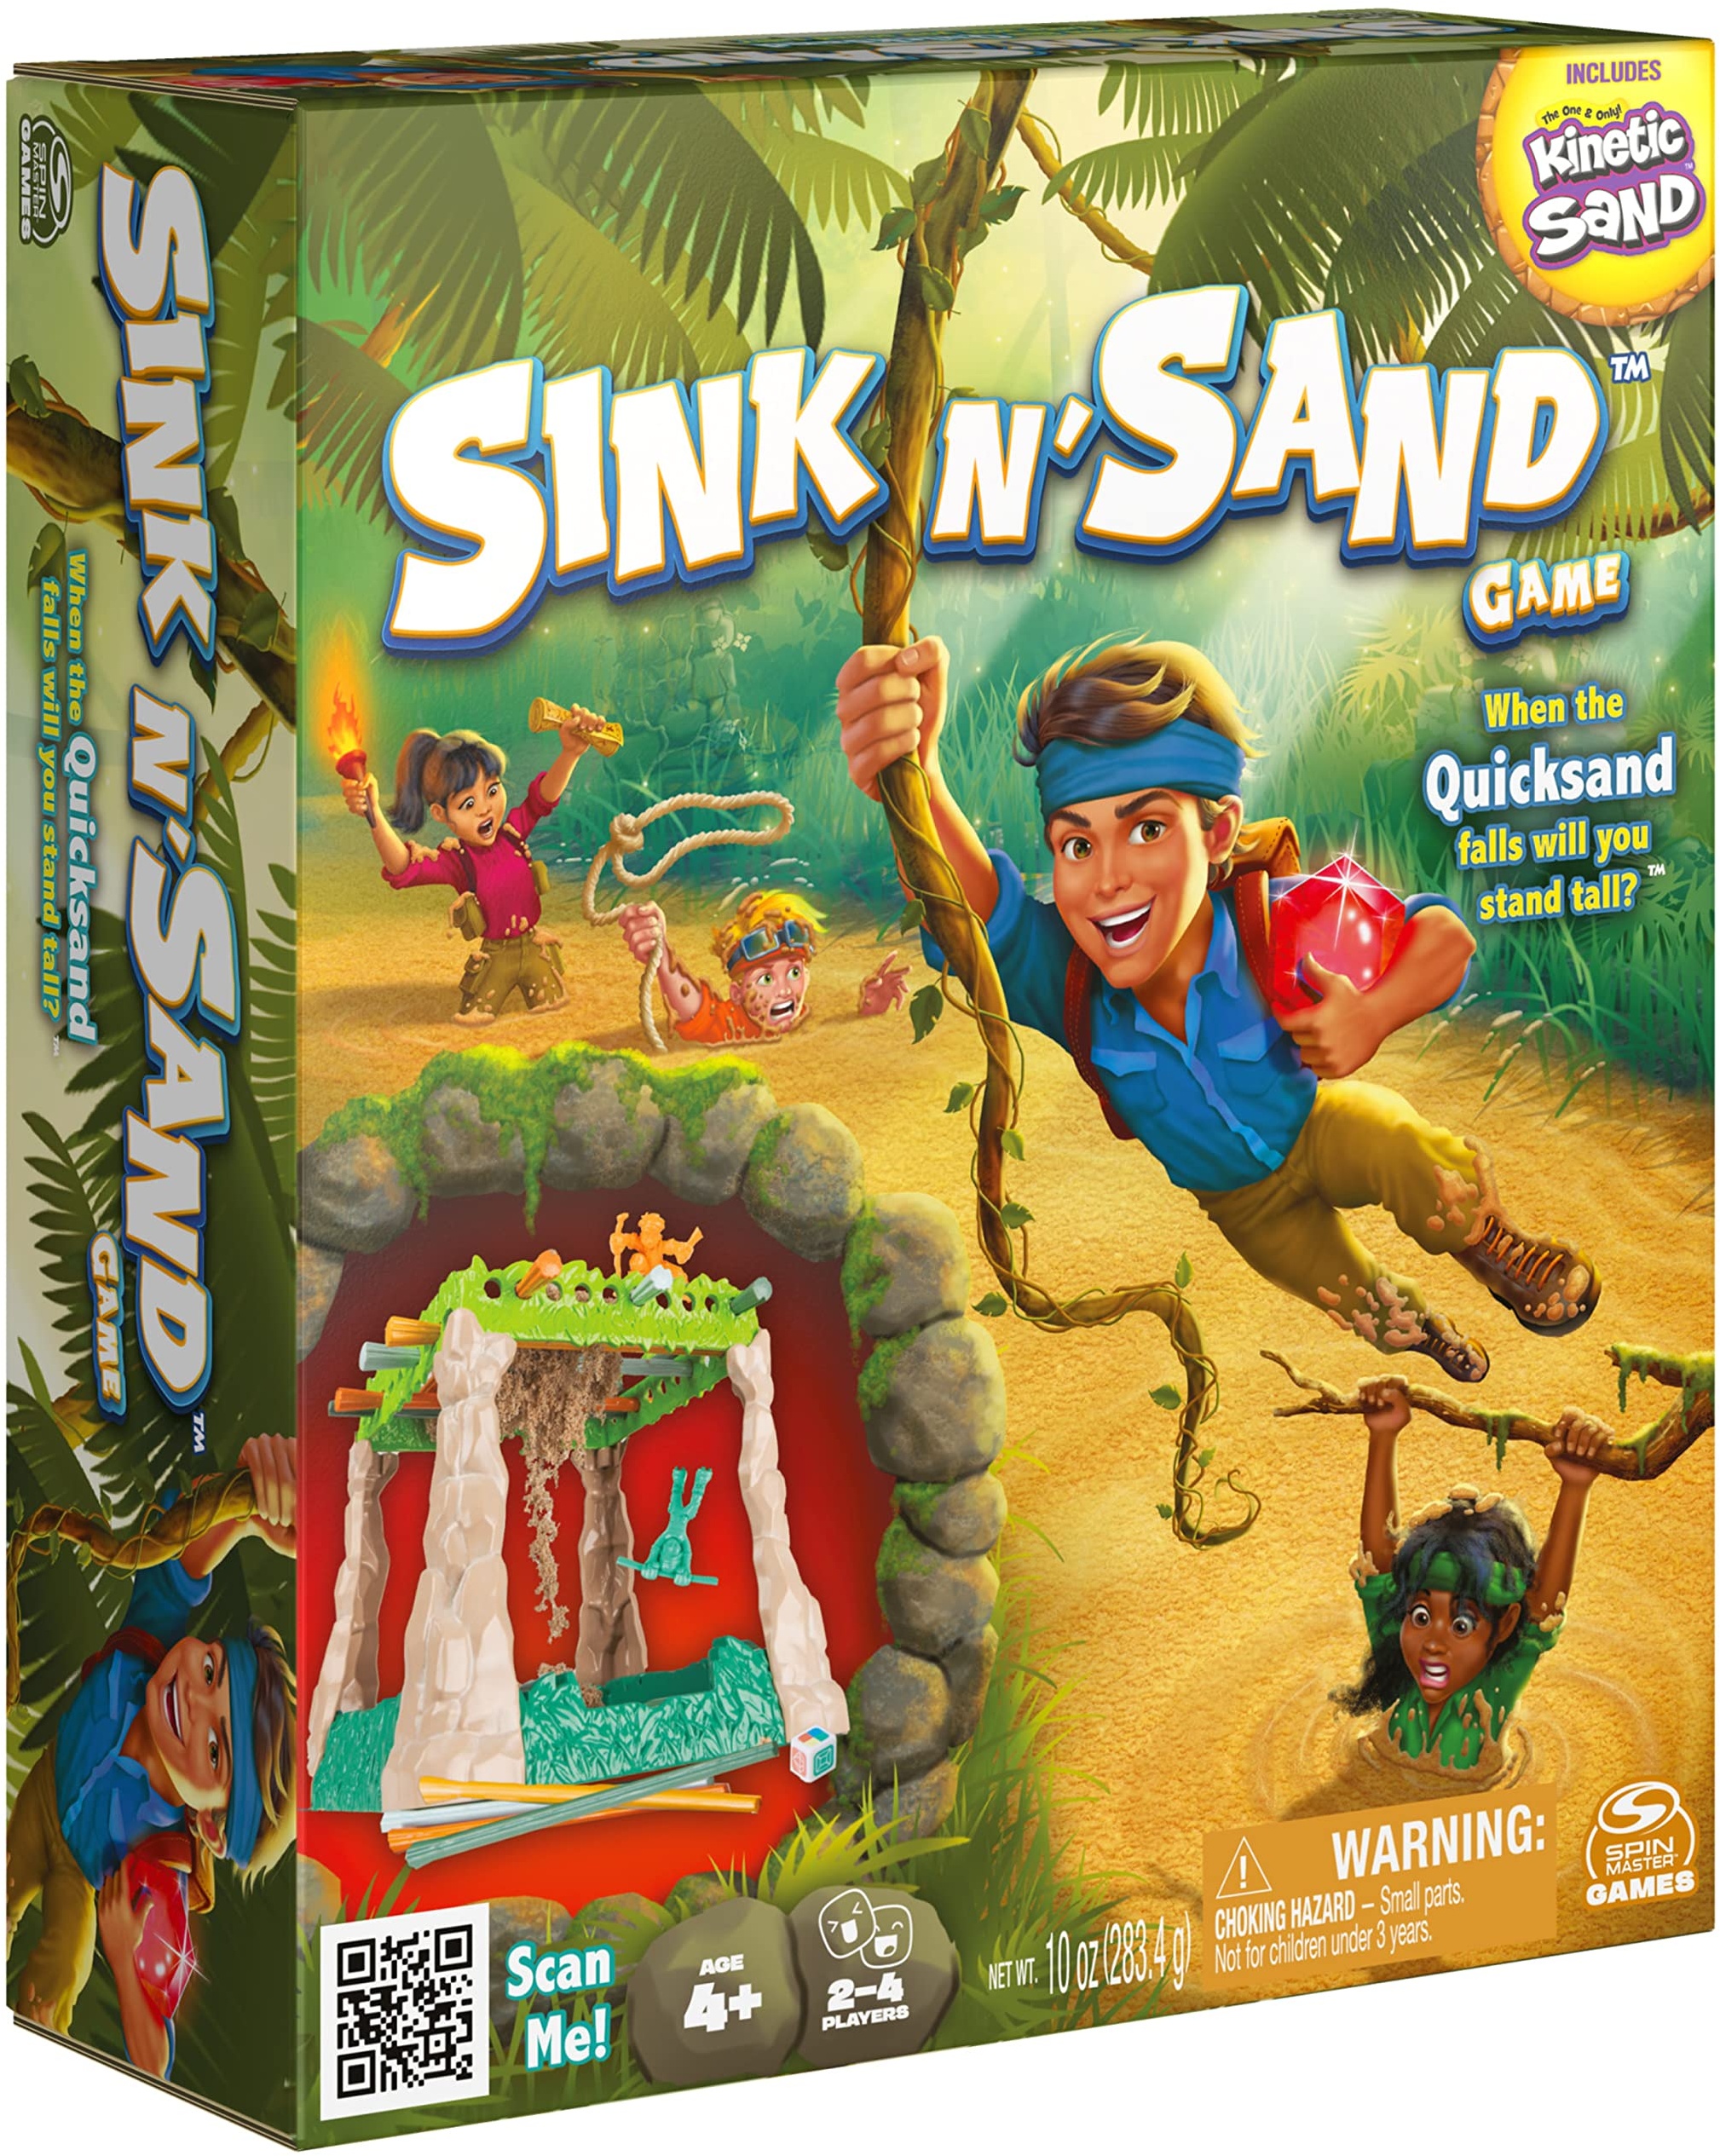 Spin Master Games 6064485 Sink N, Quicksand Board Game with Kinetic Sand Sensory Fun Learning – Easy Toy Gift Idea, for Preschoolers Kids Ages 4 and up